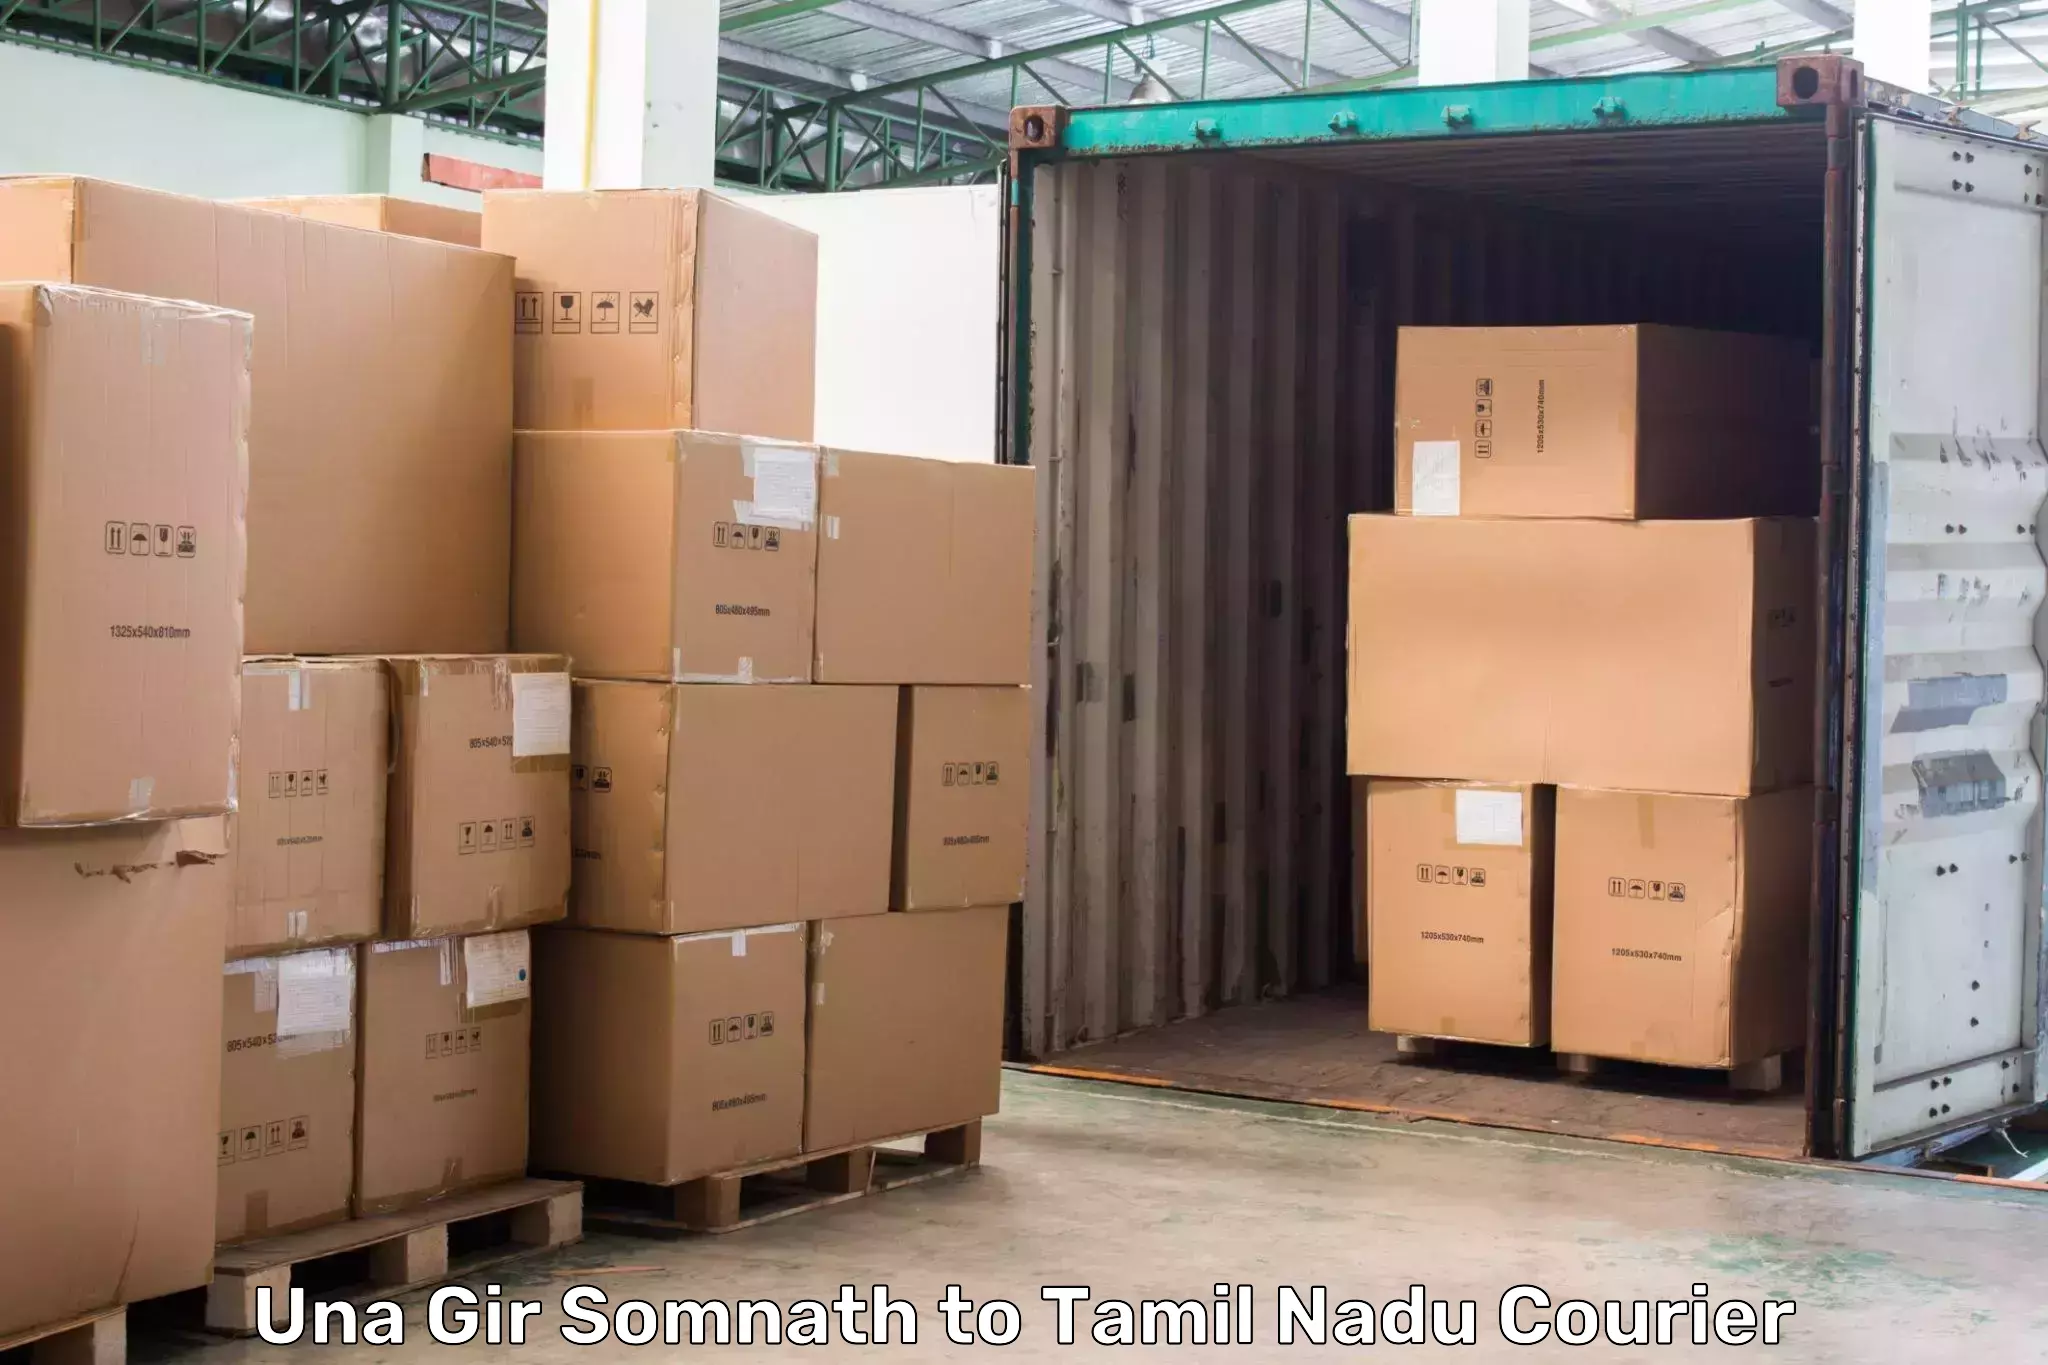 Courier service booking Una Gir Somnath to Aranthangi